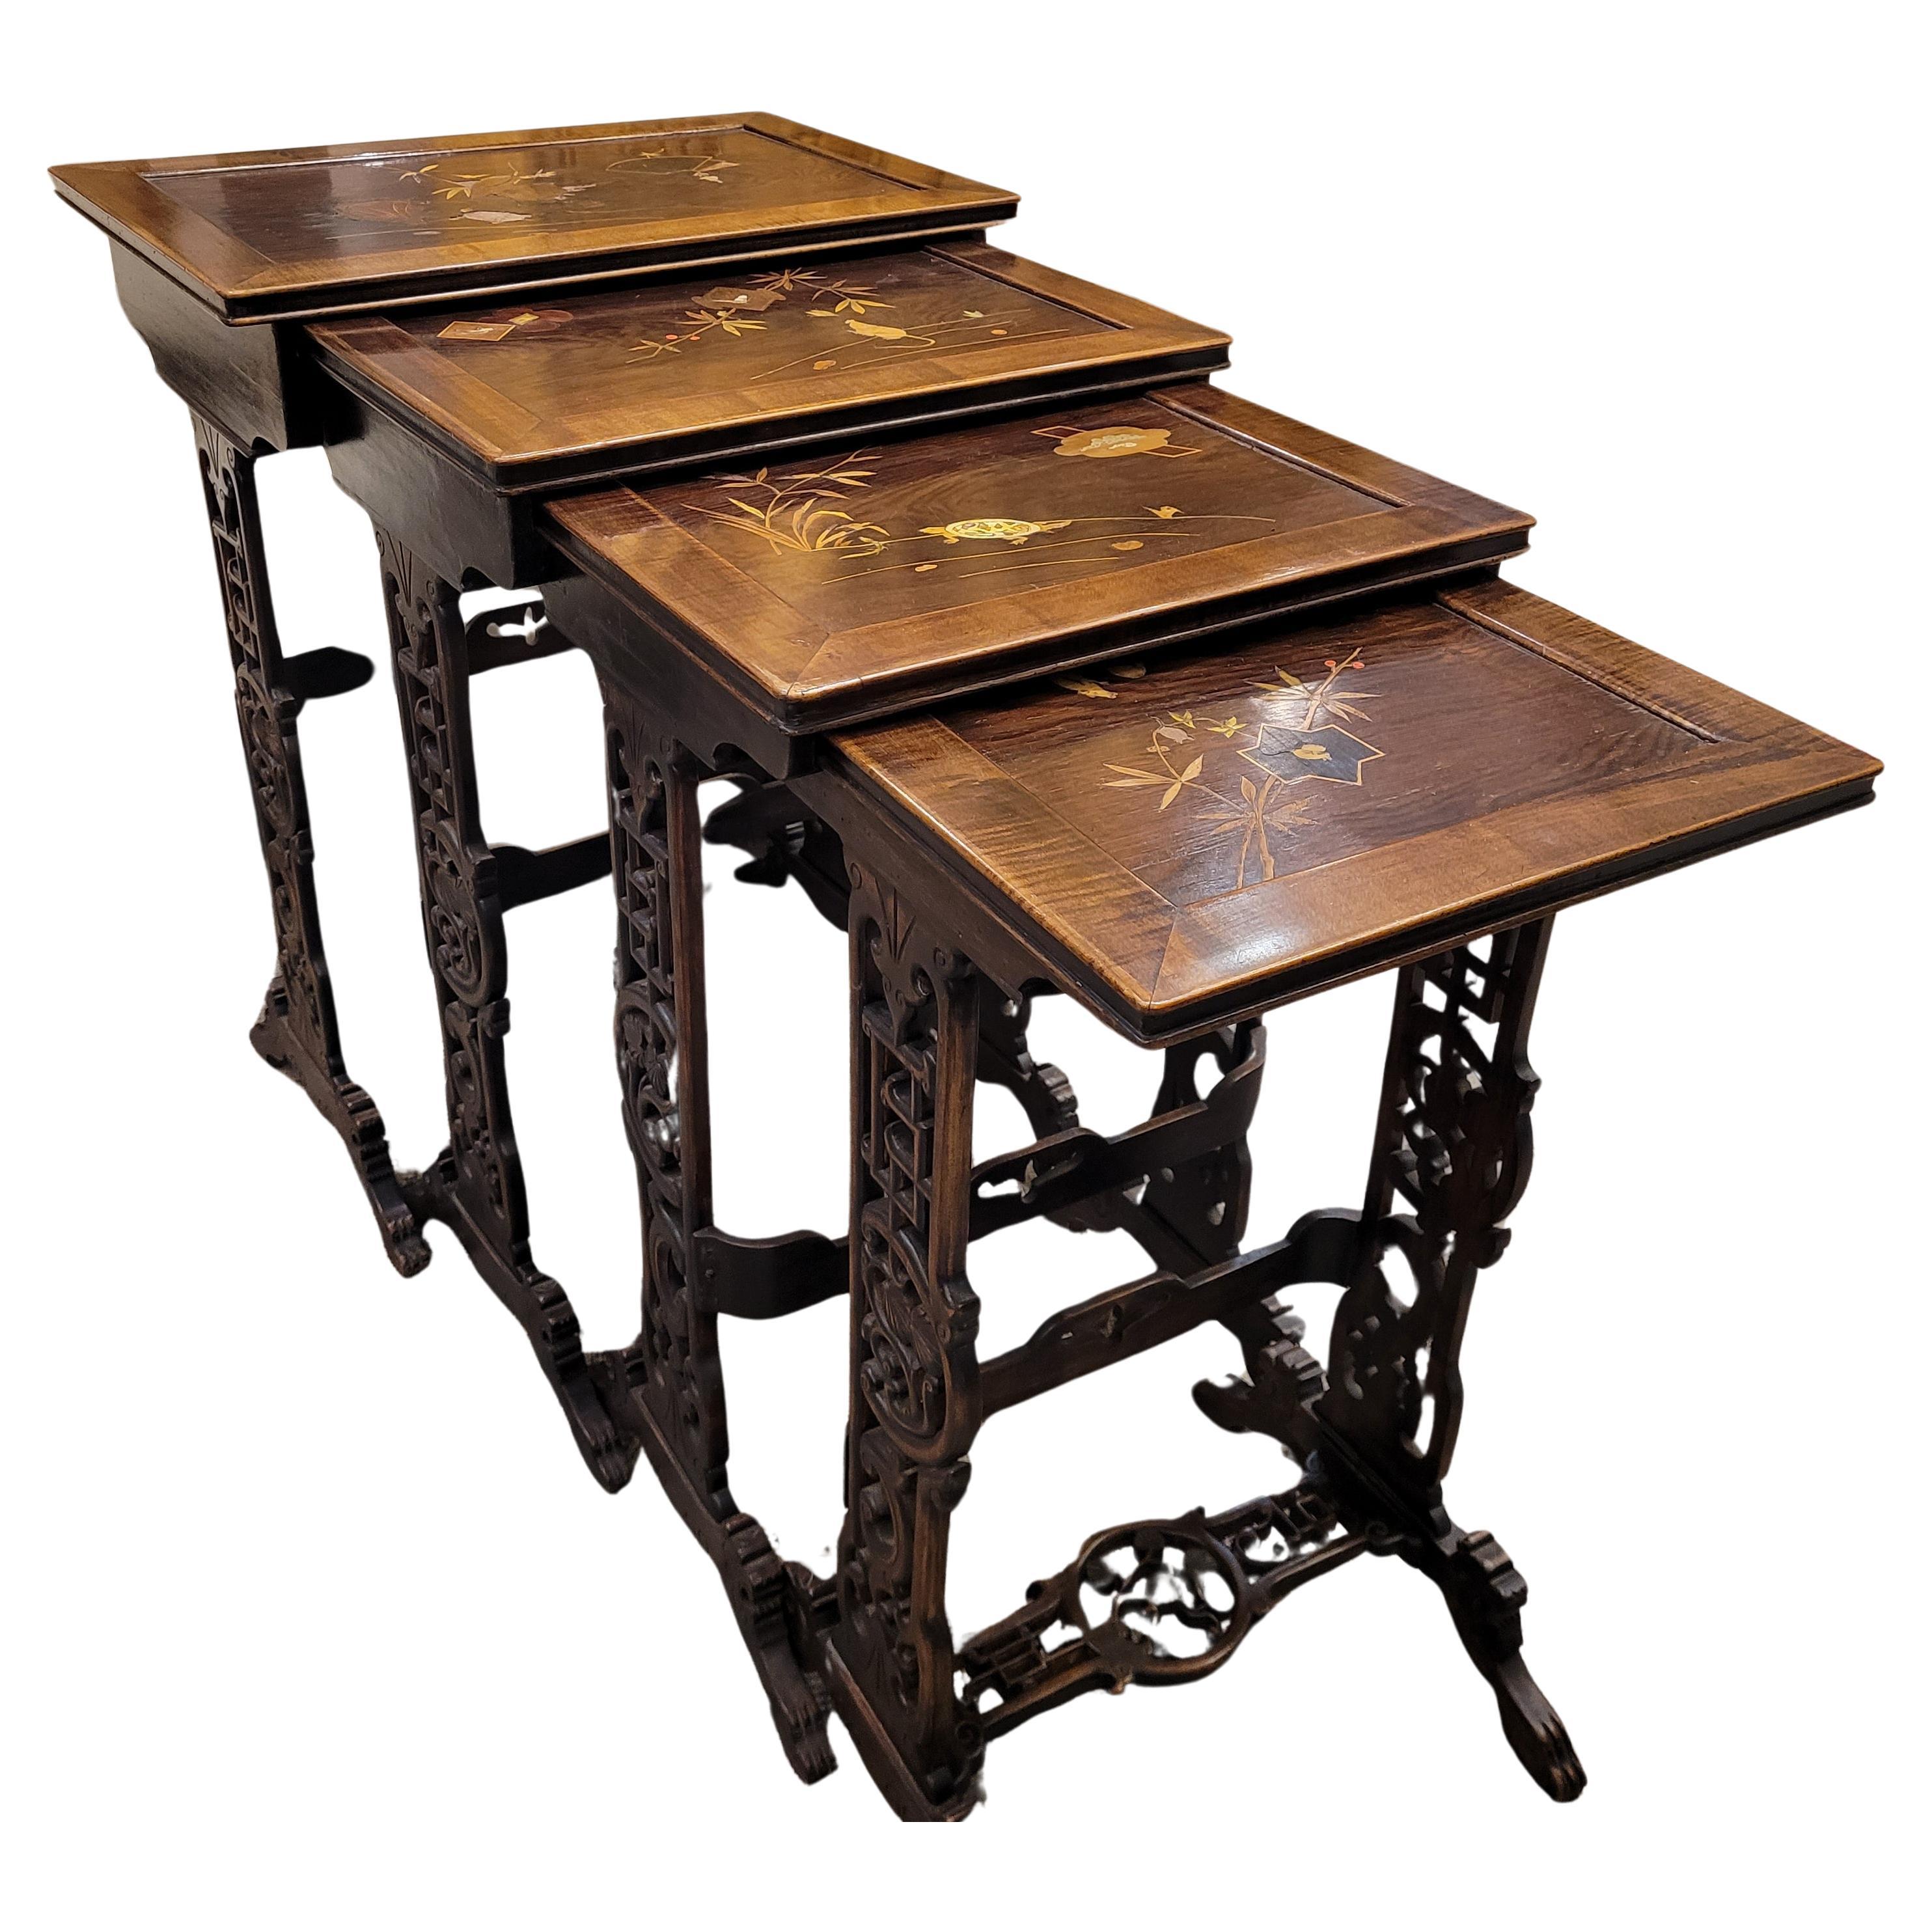 Extraordinary and one of a kind set of nesting tables with decoration following late 19th century Japanese style, attributed to the renowned  French artist Gabriel-Frédéric Viardot (1830 - 1906).
The tables have decorations of turtles, rats, bonsais